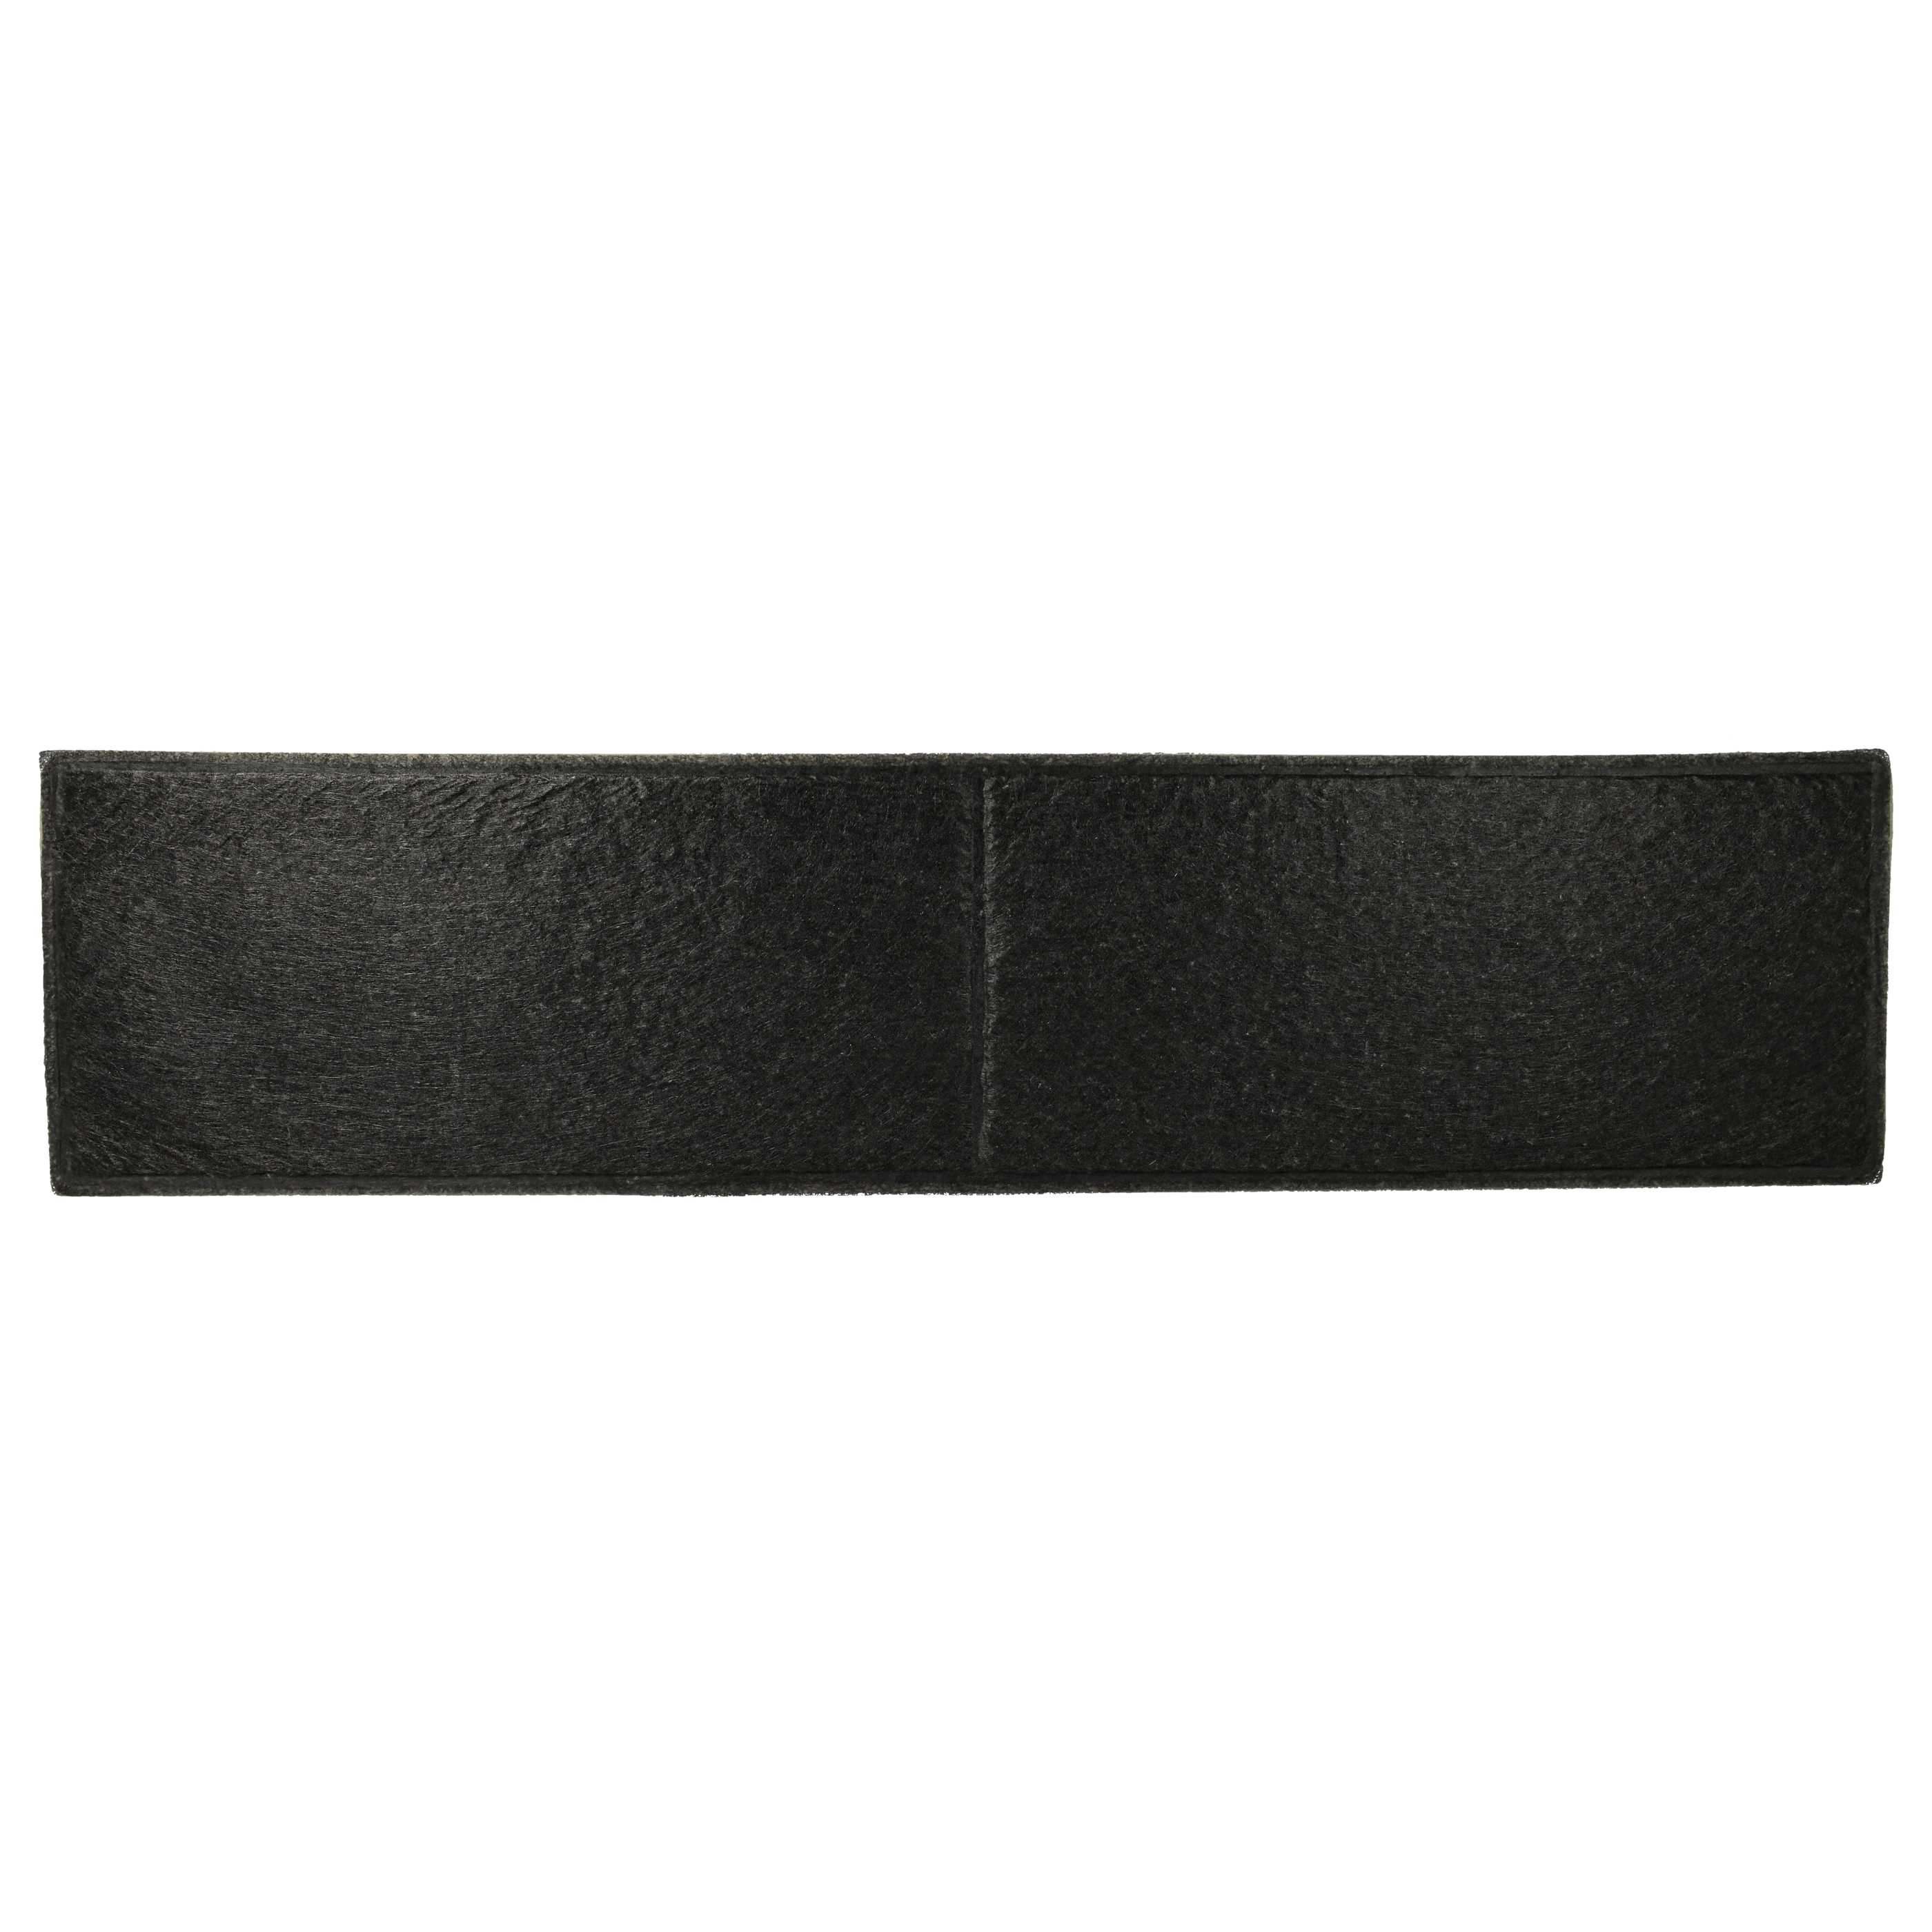 Activated Carbon Filter as Replacement for Miele 11762540 for Miele Hob - 49 x 11.3 x 2.8 cm